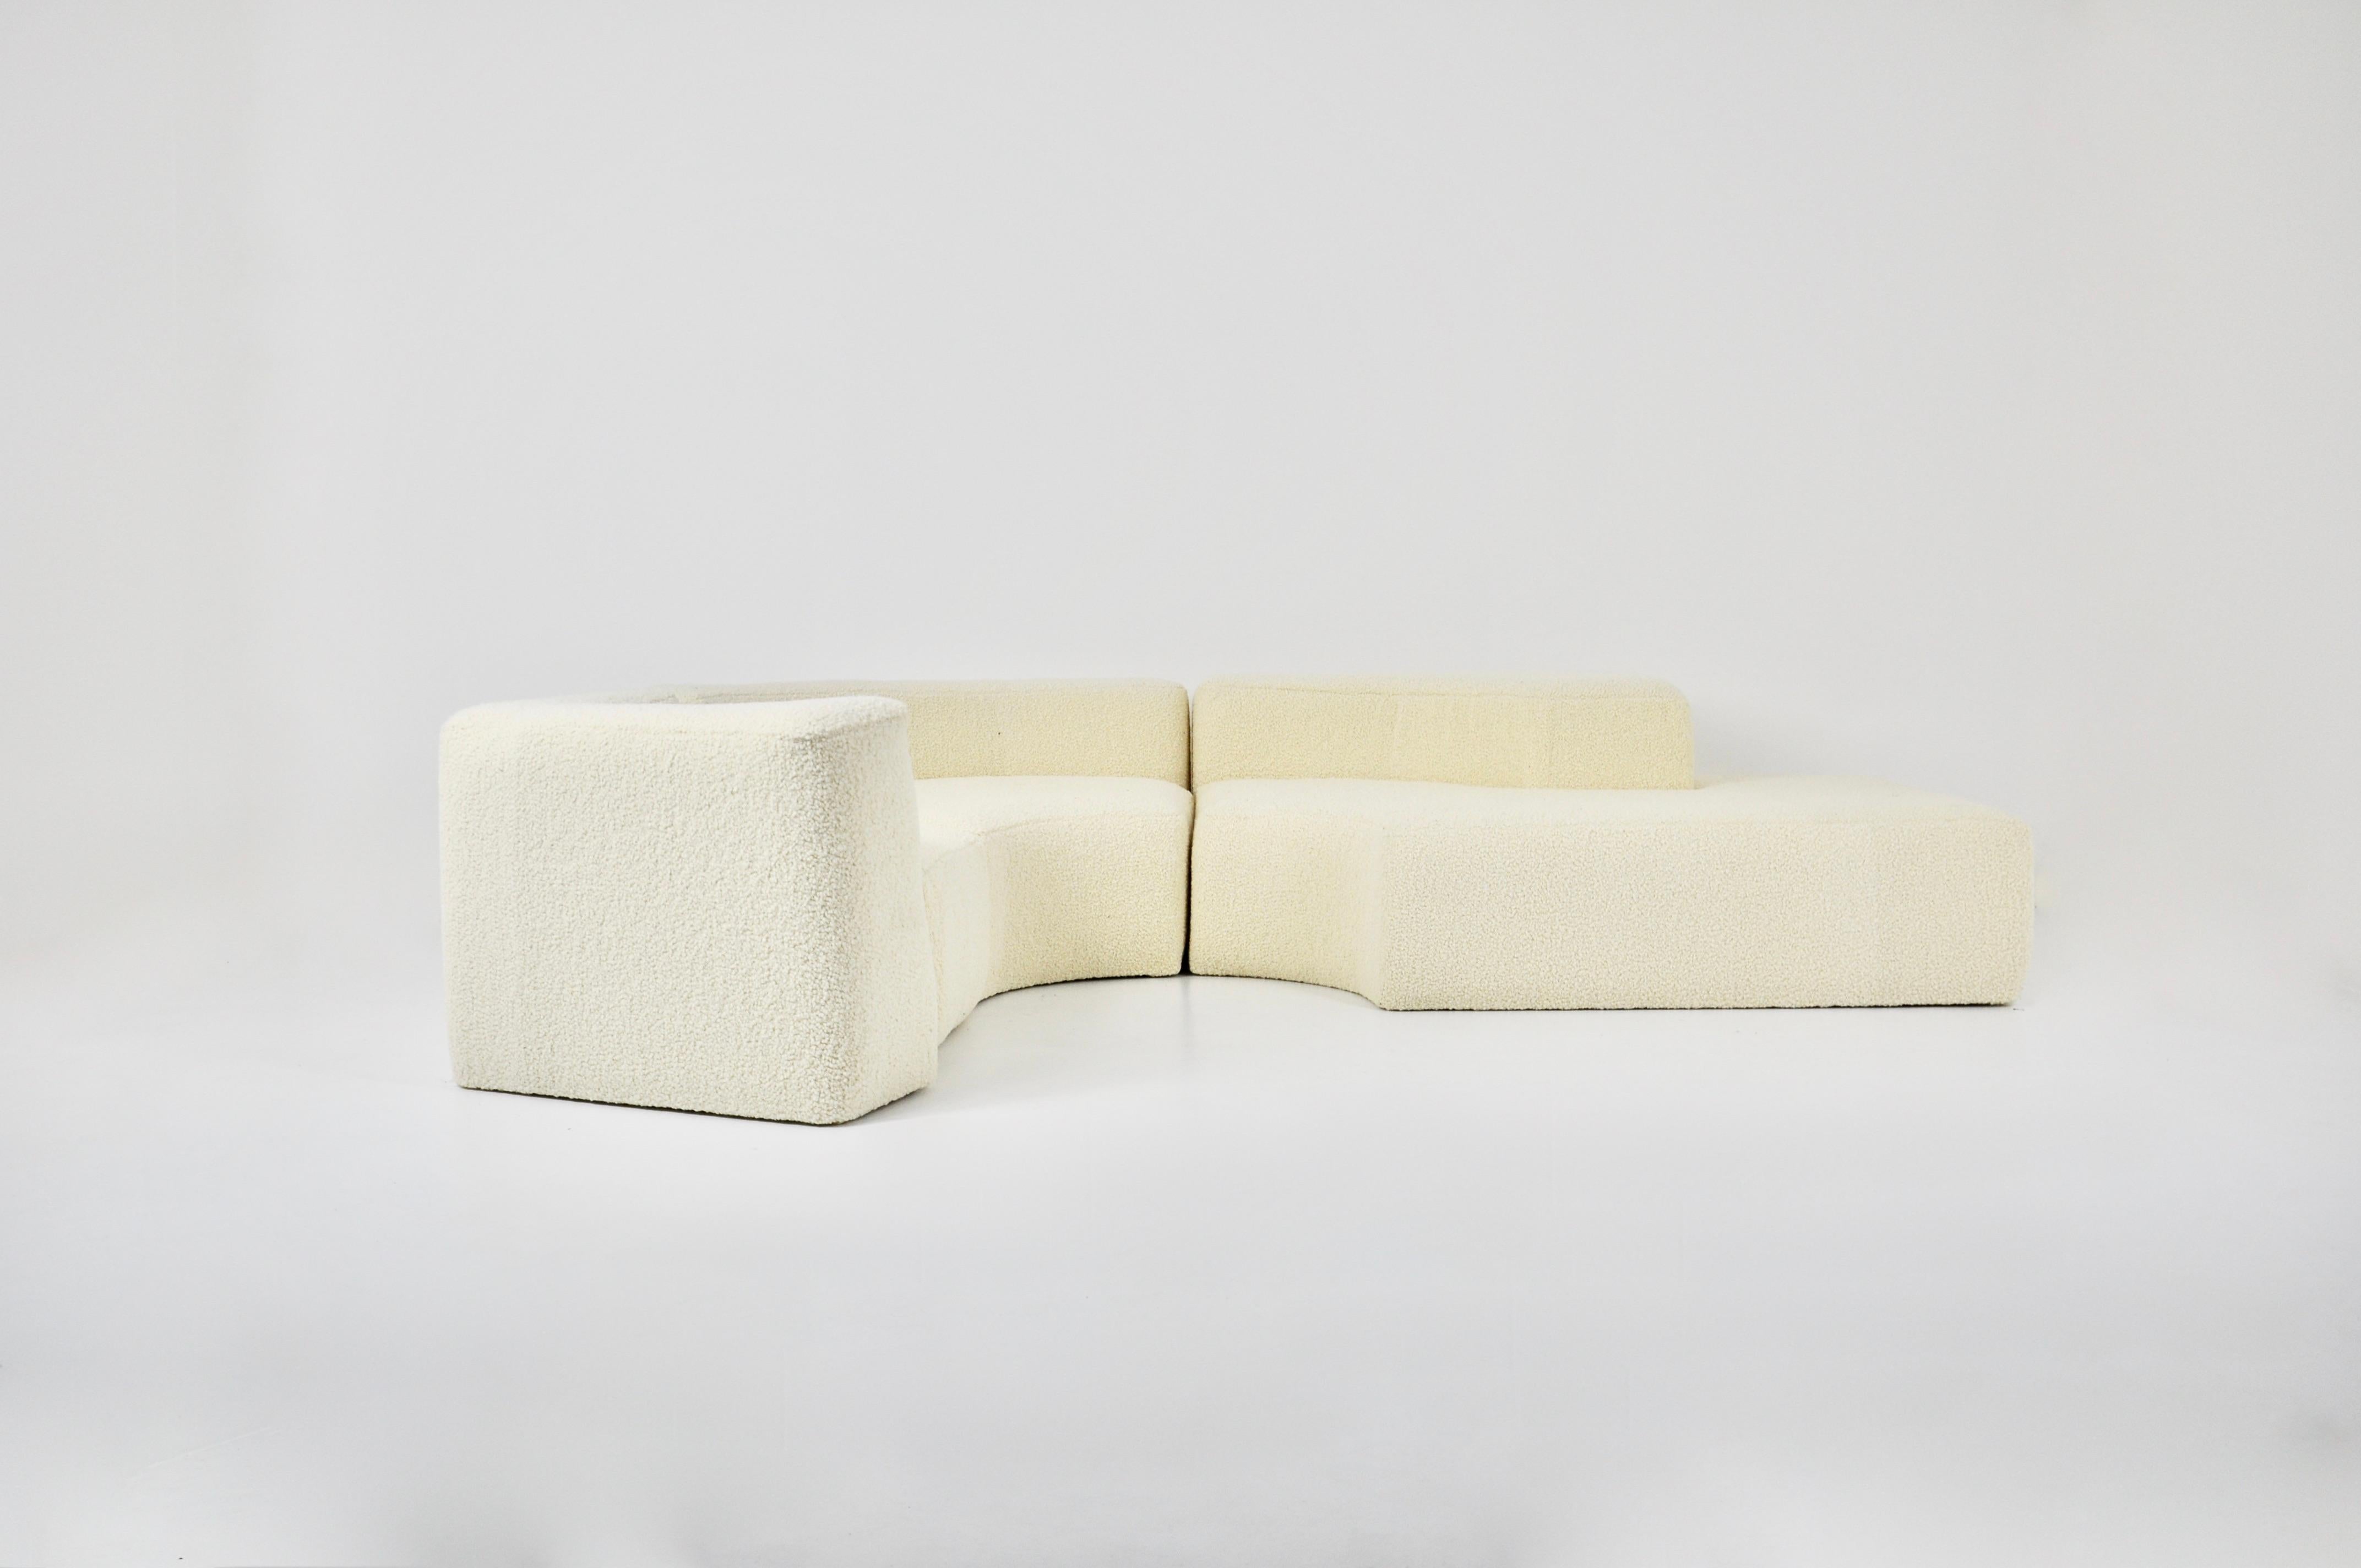 Sofa composed of 3 elements in white fabric. New fabric. Wear due to time and age of the chair. Measures: Seat height 37cm.